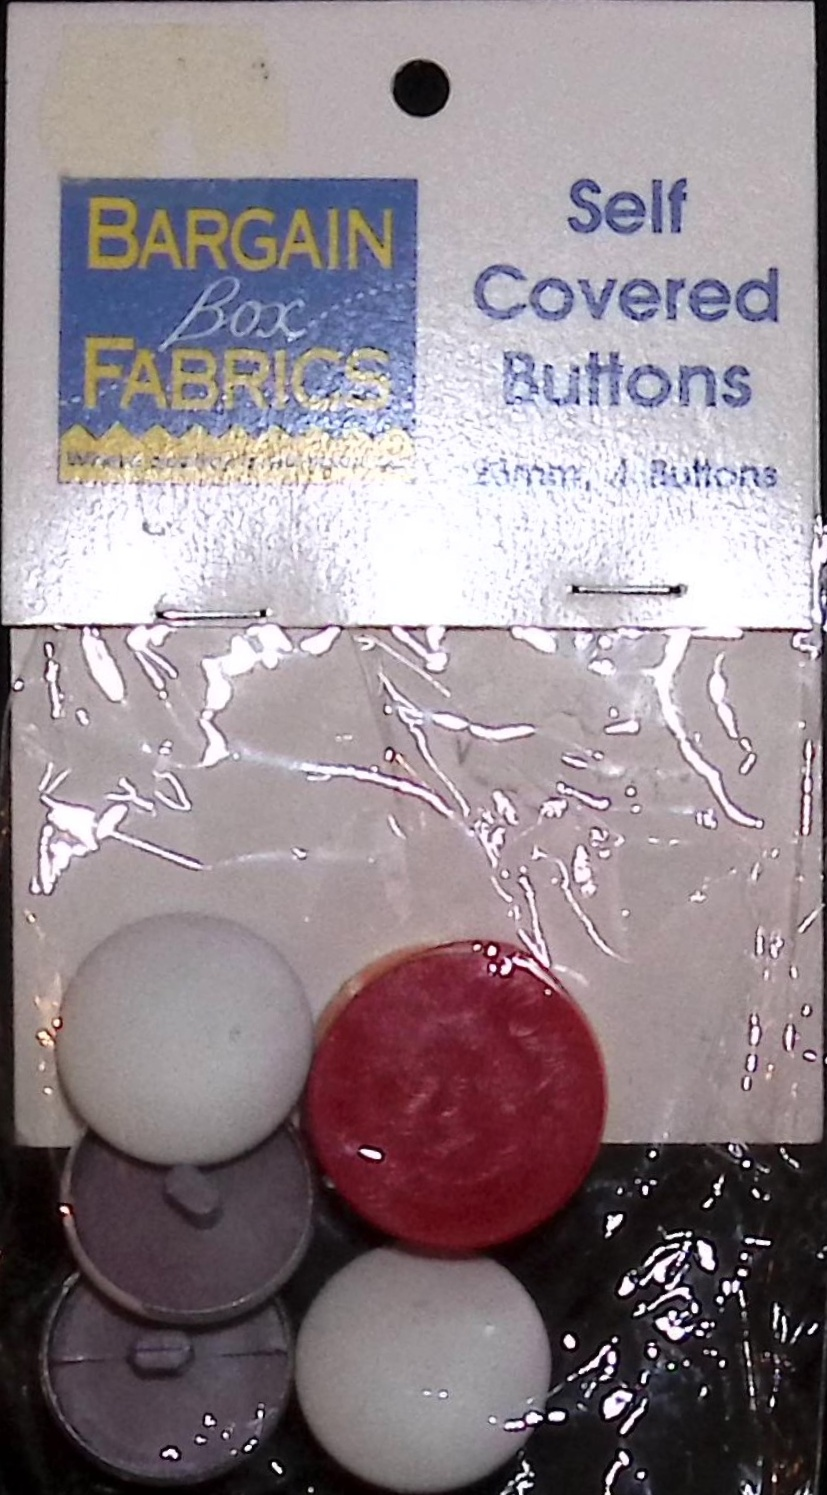 Bargain Box Fabrics Self Covered Buttons 23mm